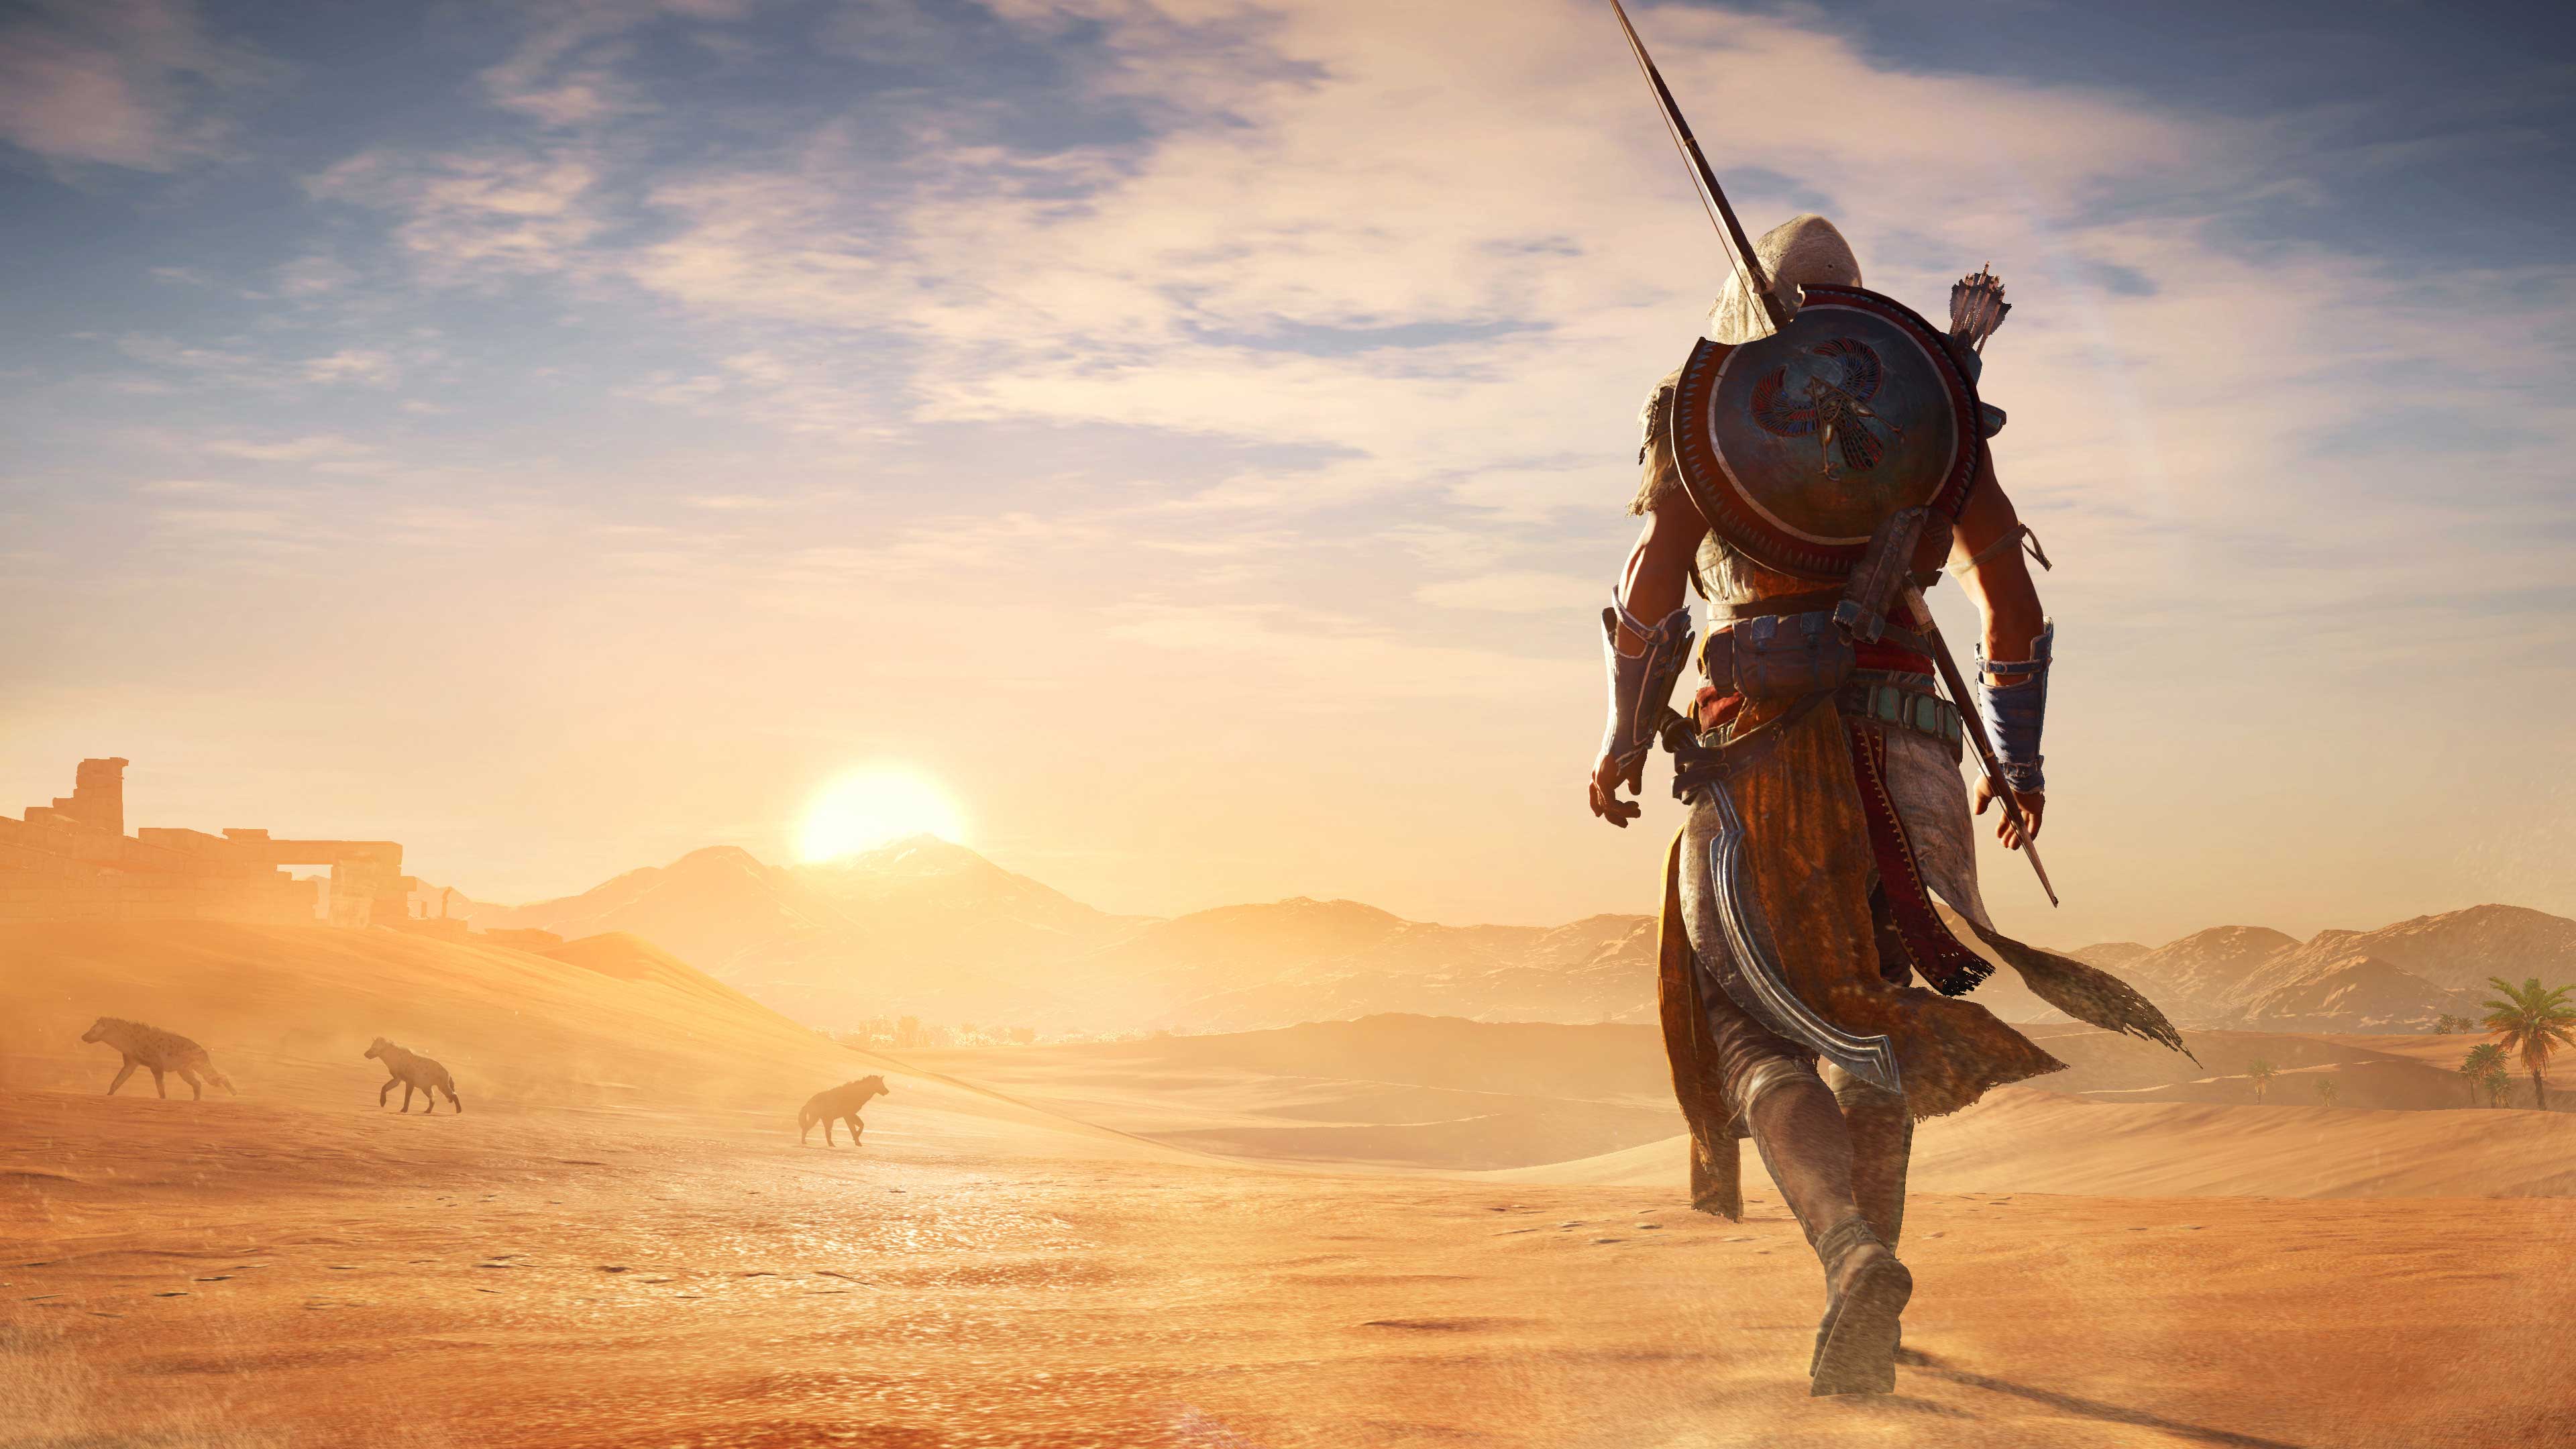 Image for Assassin's Creed: Origins - here's the secret reward you get after finishing new game plus